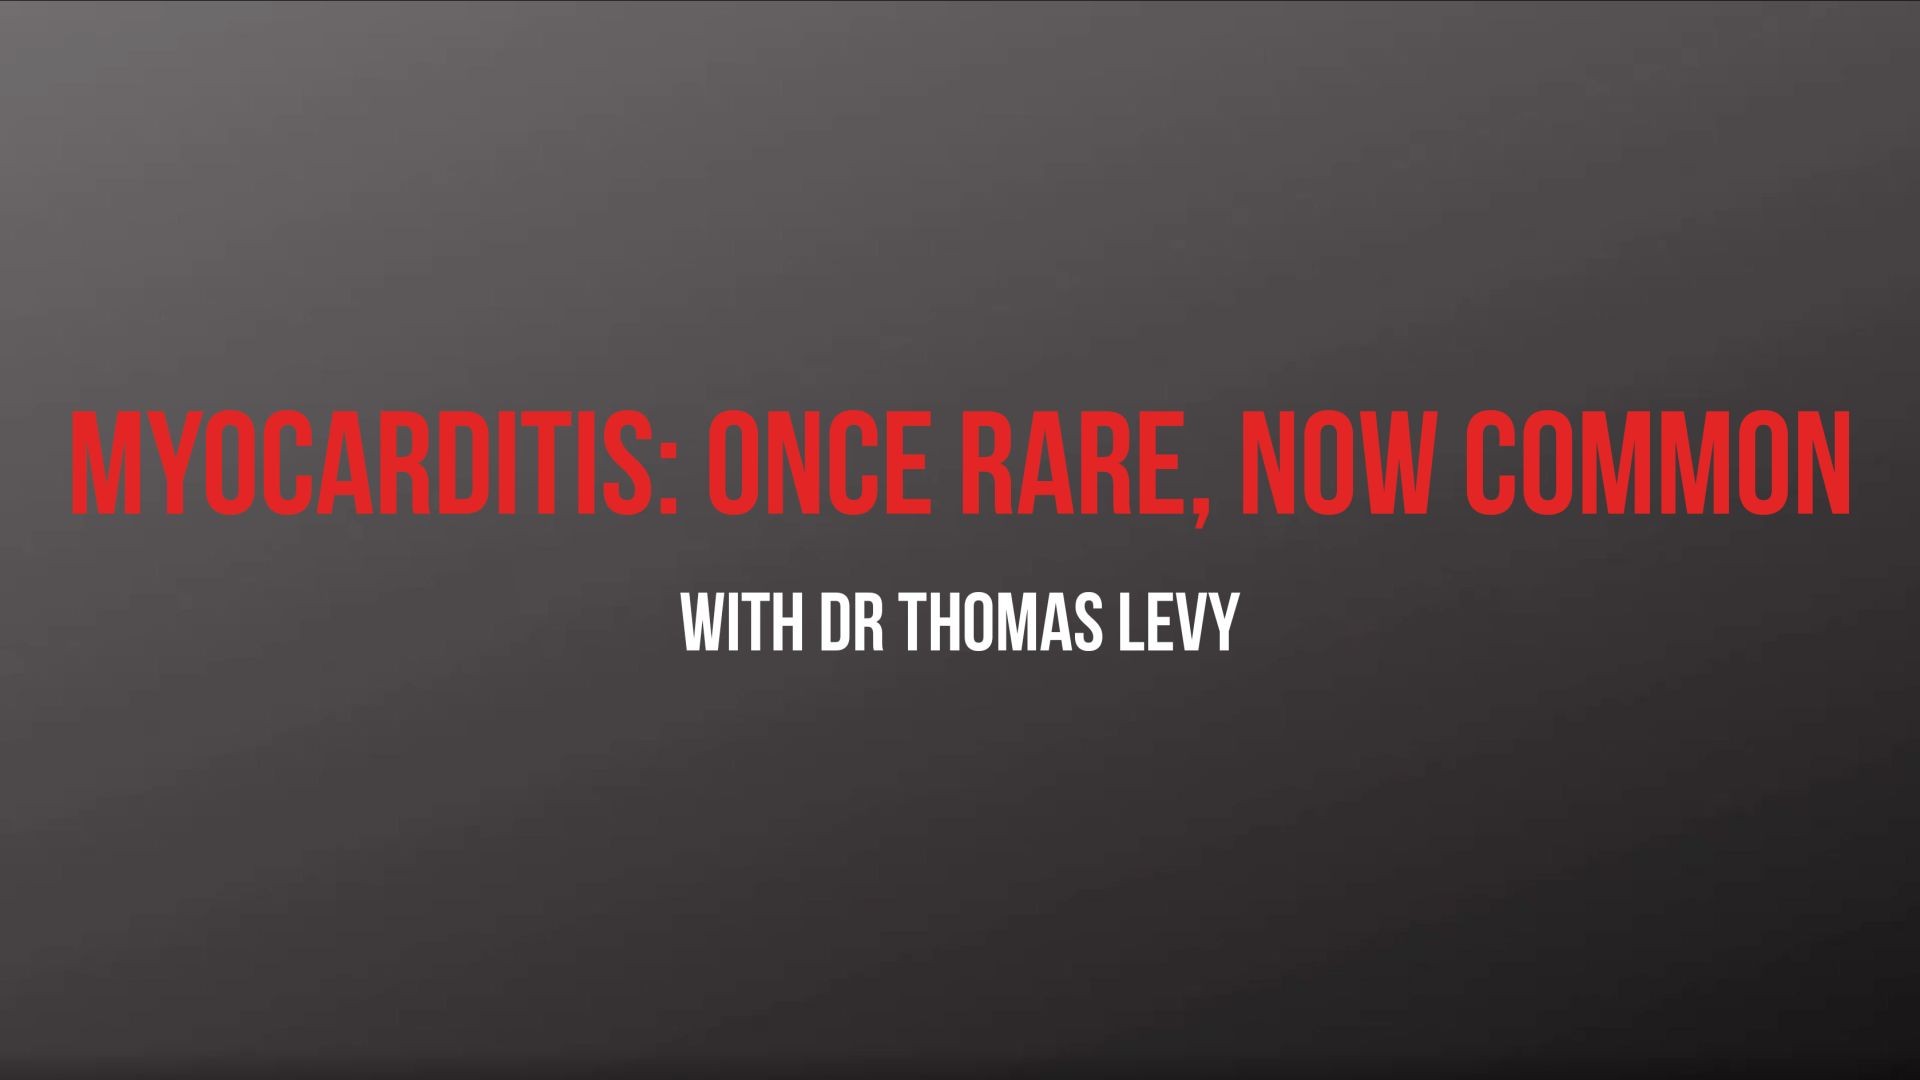 "Myocarditis: Once Rare, Now Common" - Dr. Thomas Levy, MD, JD Explains